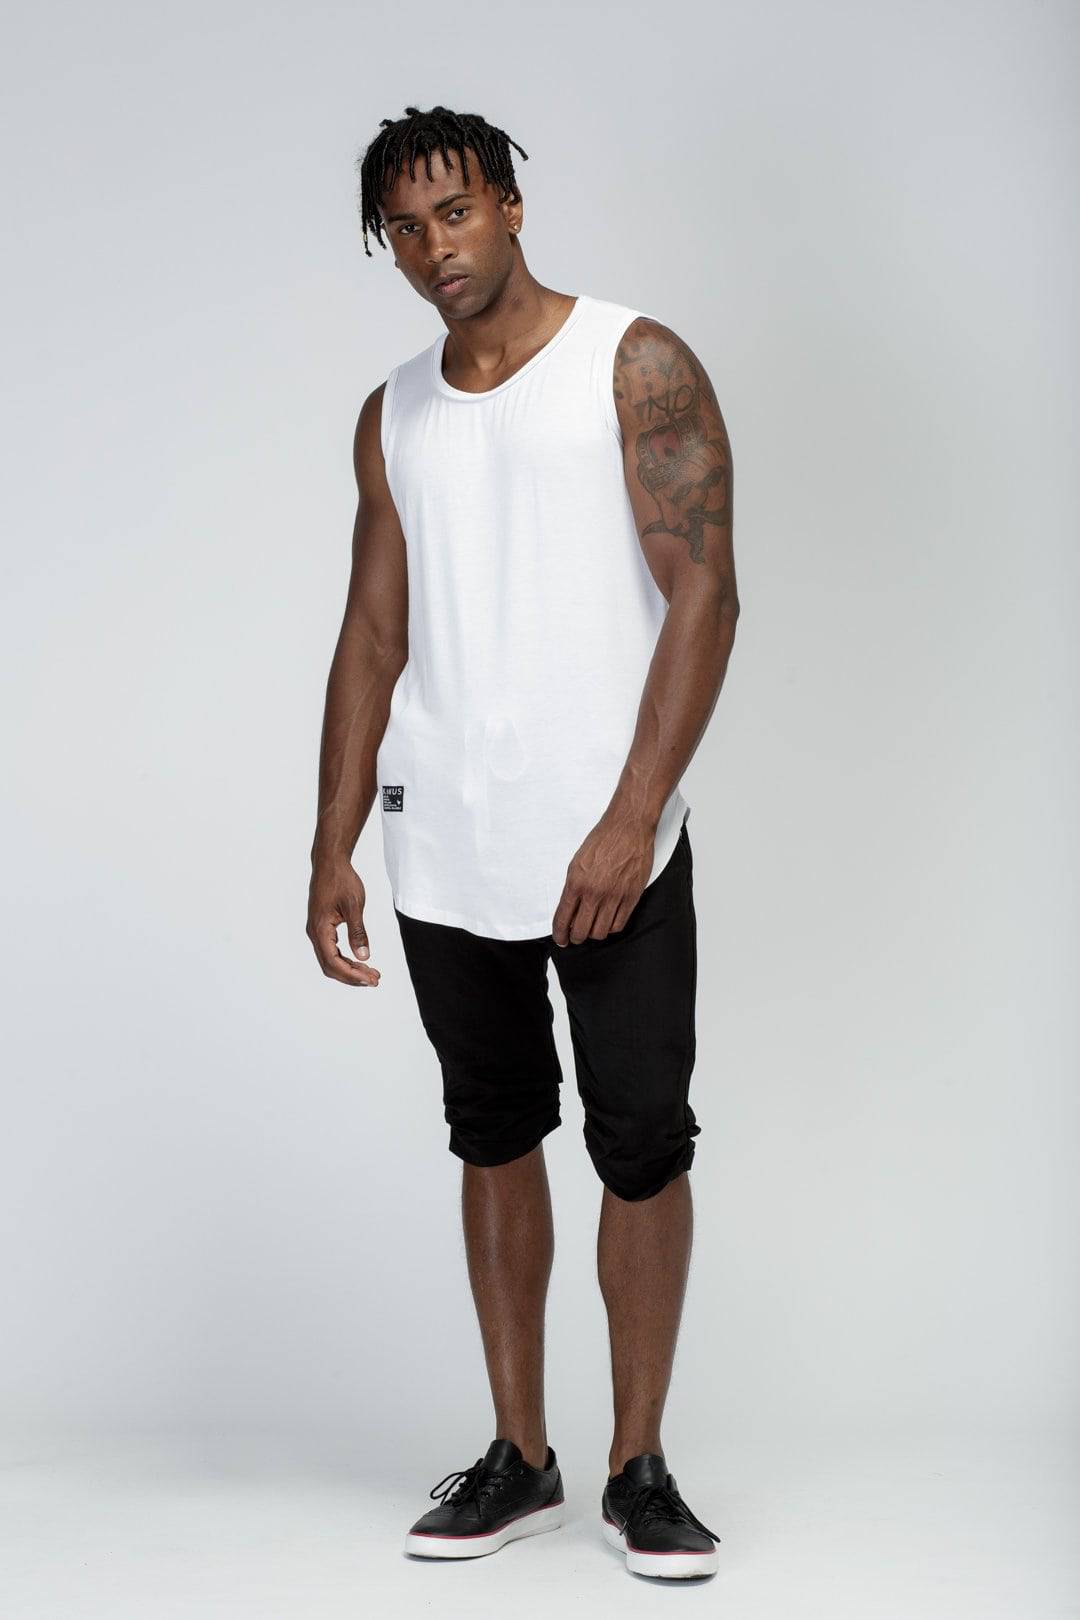 Konus Men's Tank Top with Accent Label in White by Shop at Konus